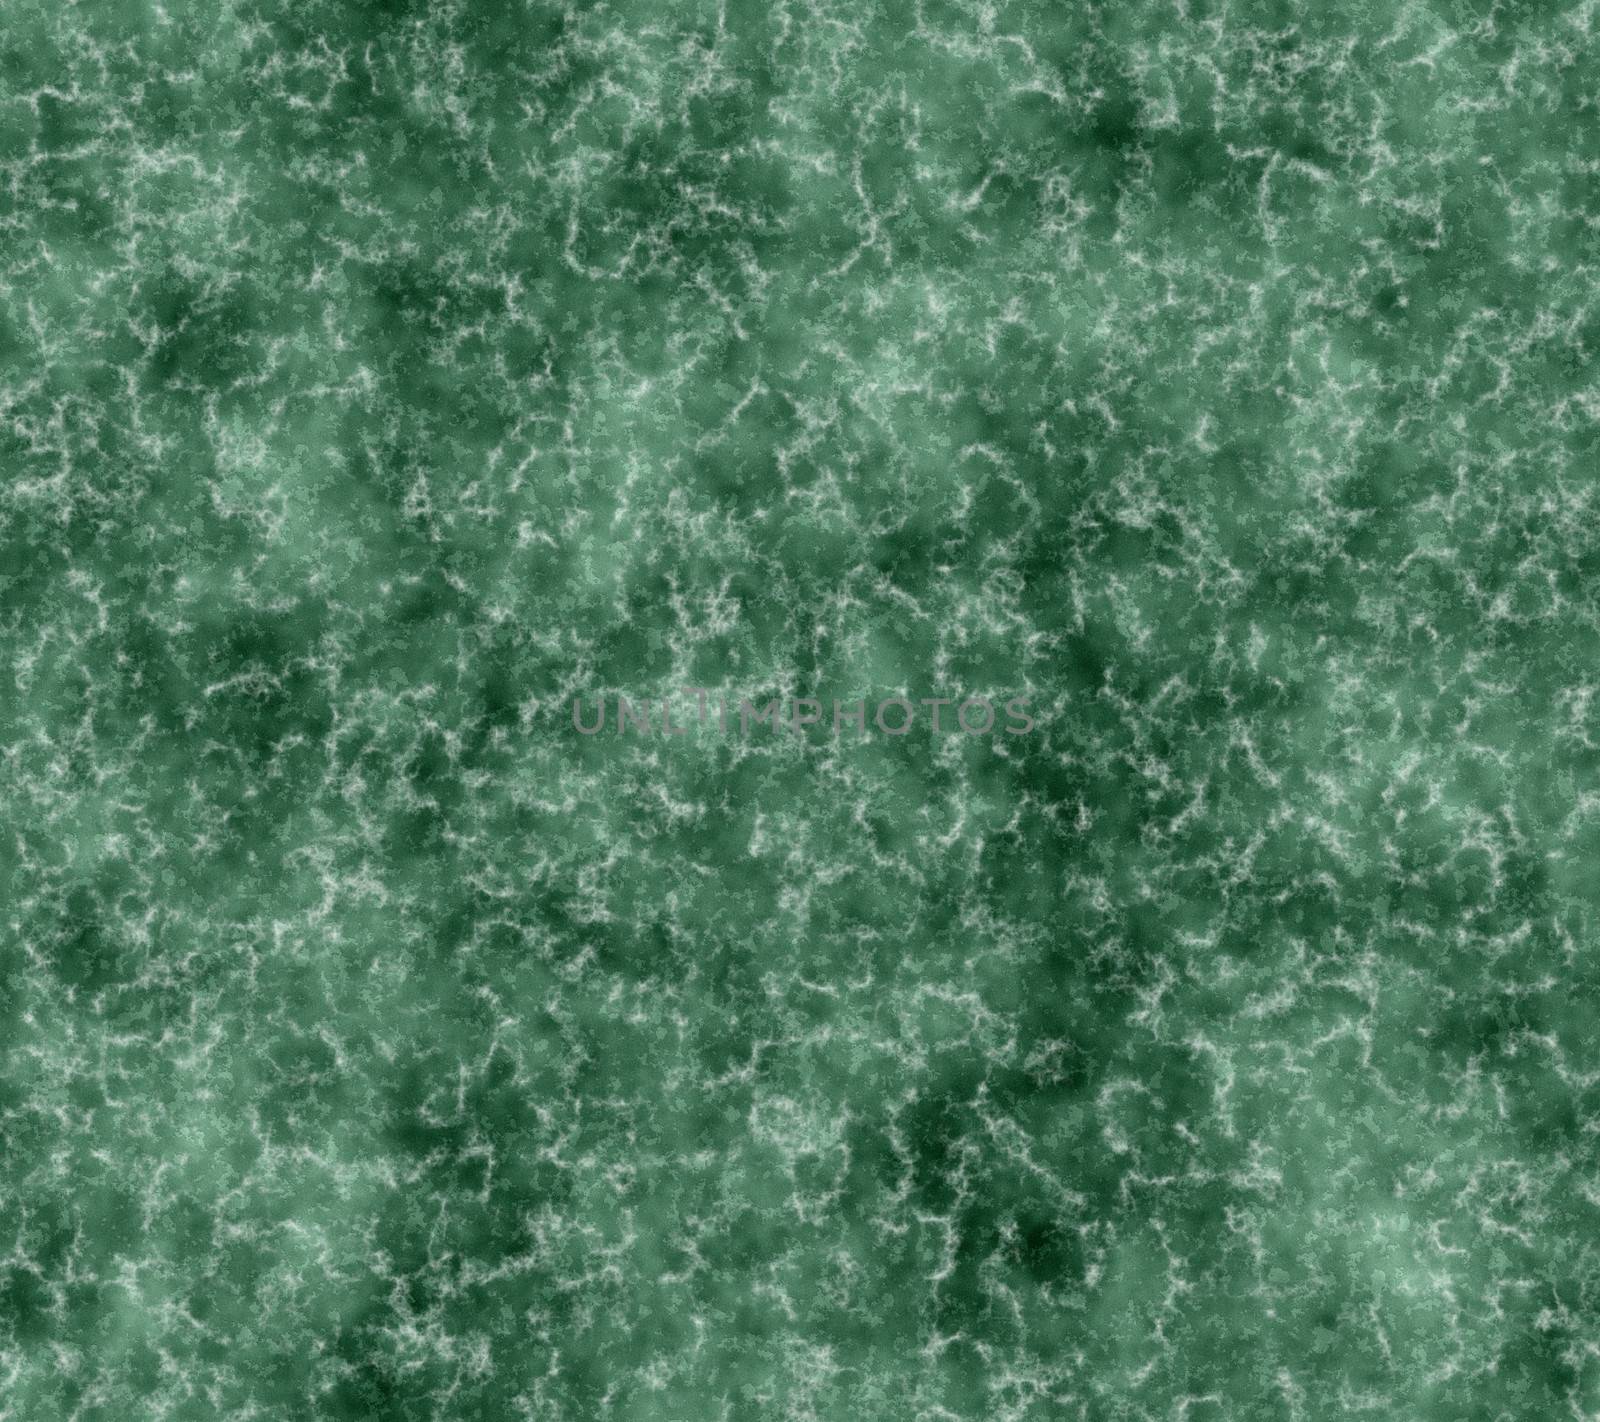 Grunge green background with